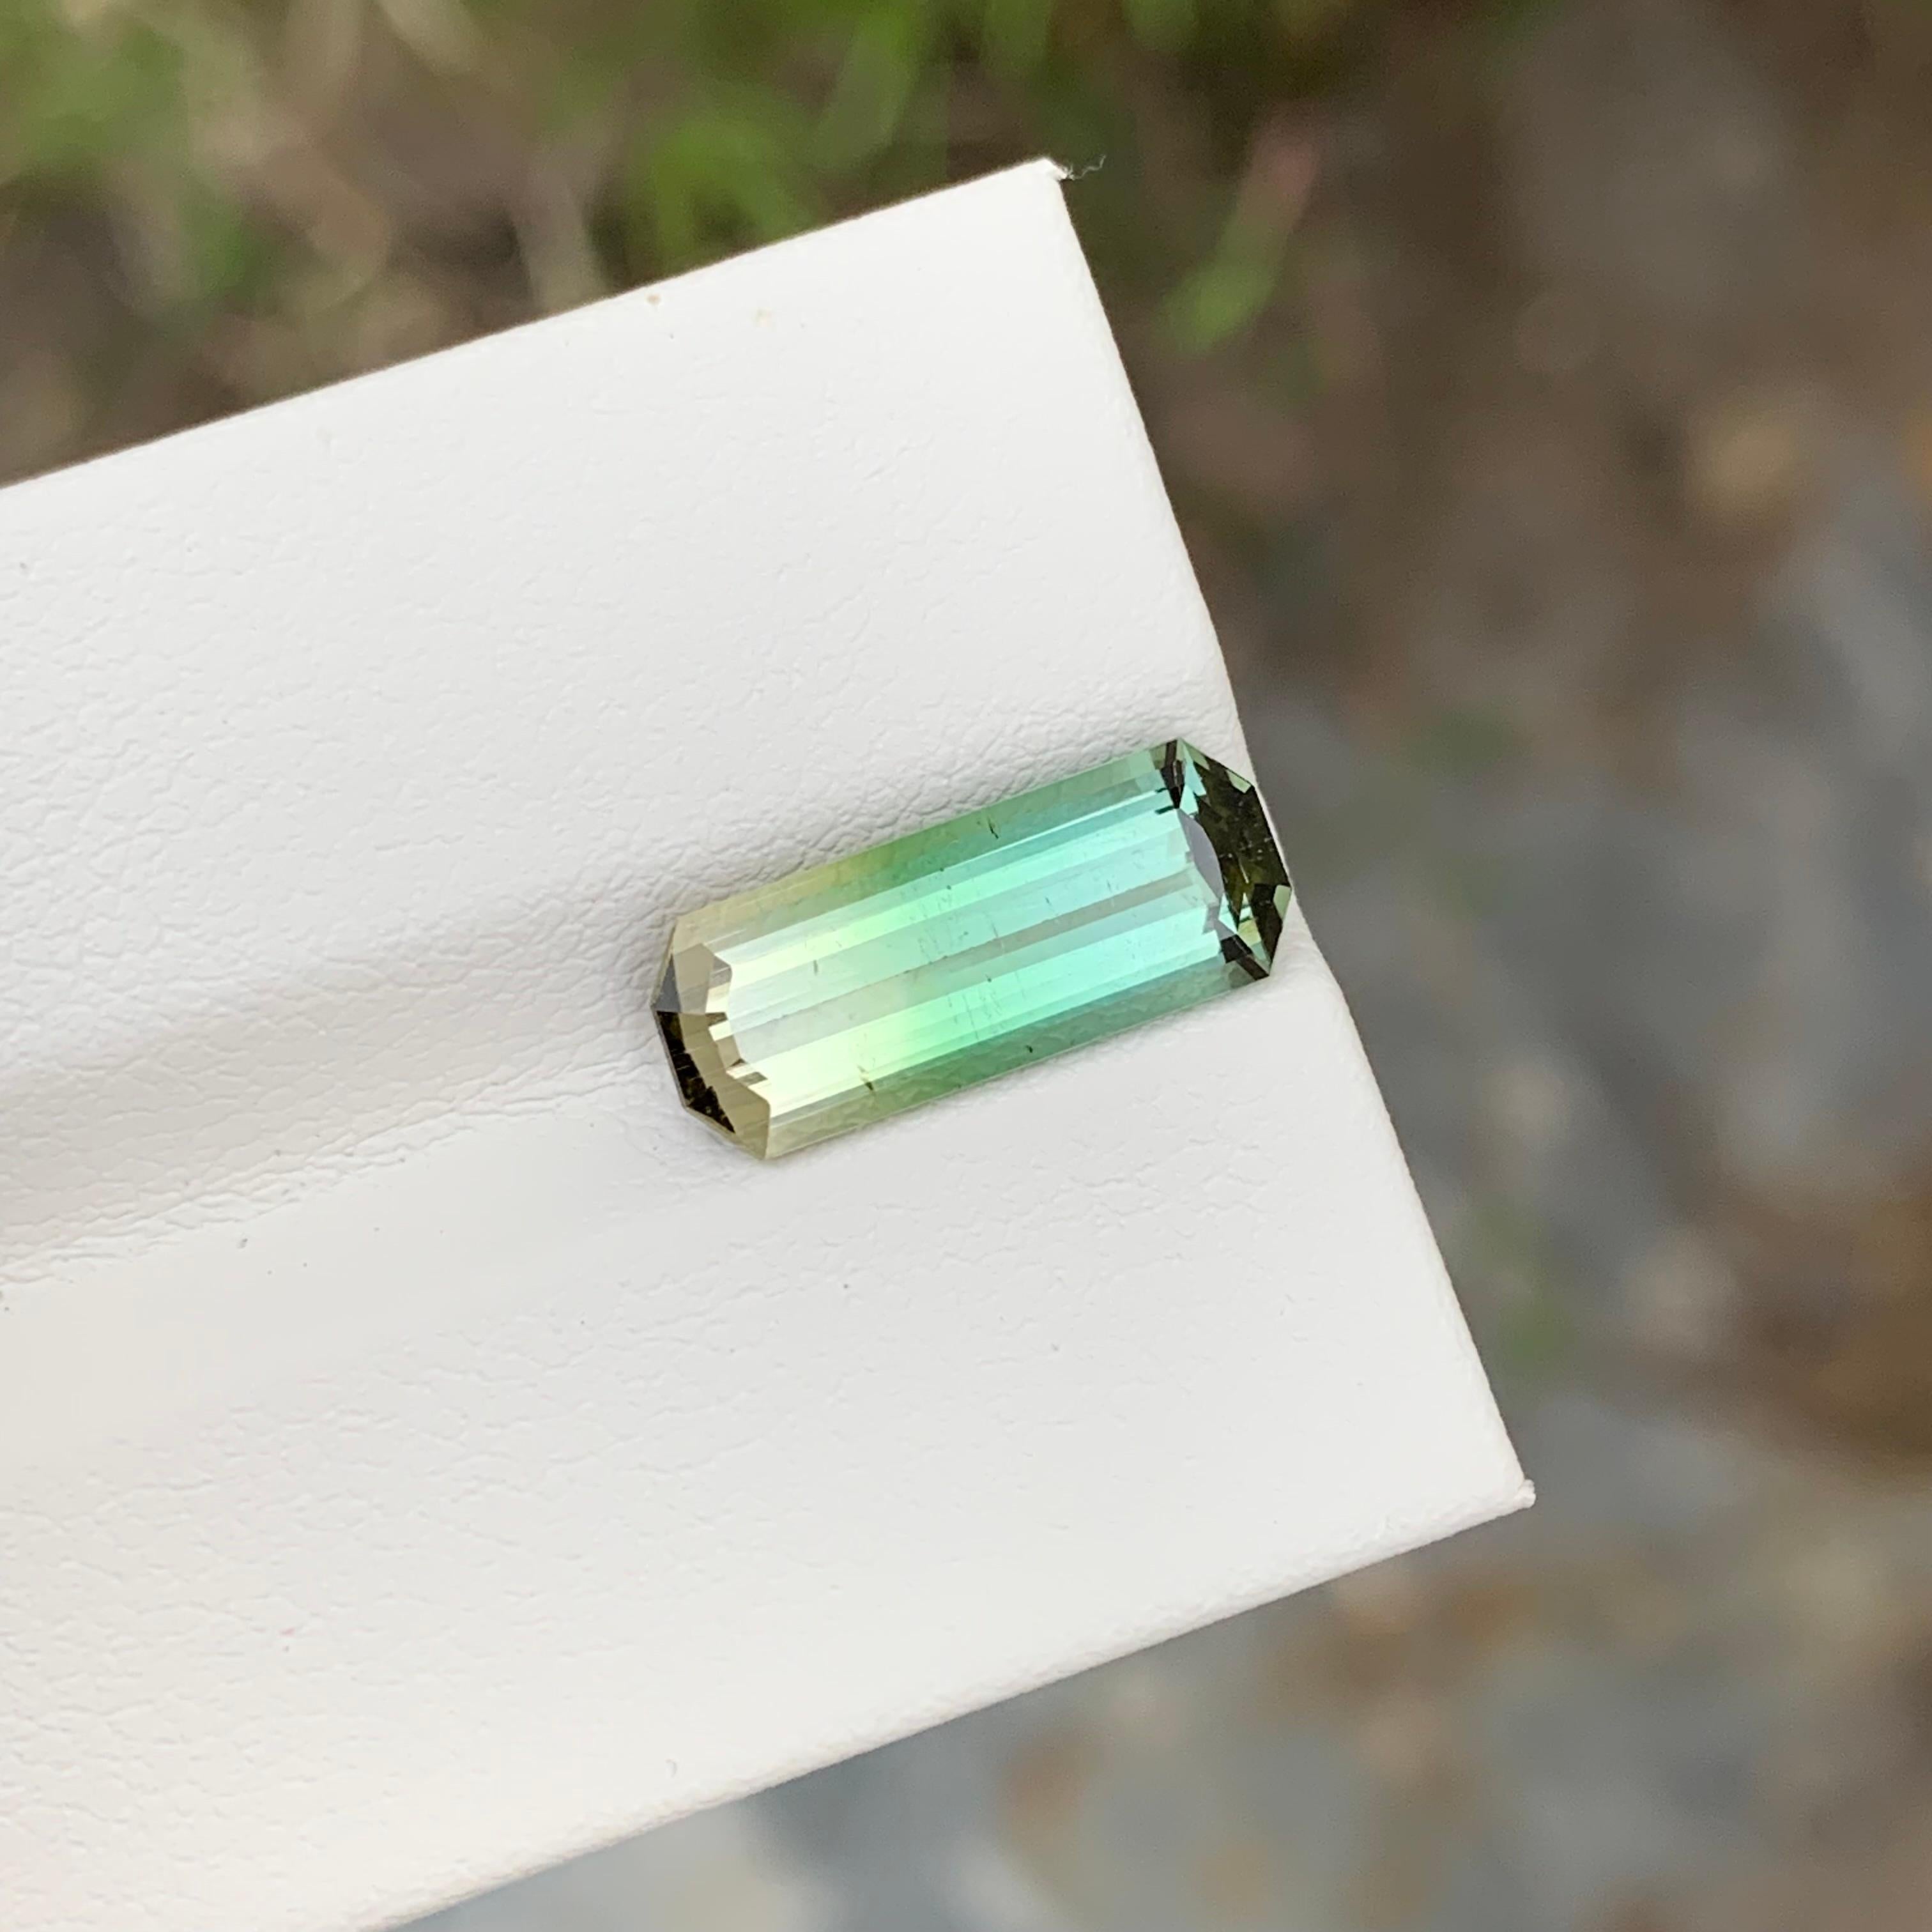 Loose Bi Colour Tourmaline

Weight: 3.50 Carats
Dimension: 15.3 x 6 x 4.2 Mm
Colour: Green And Yellow 
Origin: Africa
Certificate: On Demand
Treatment: Non

Tourmaline is a captivating gemstone known for its remarkable variety of colors, making it a